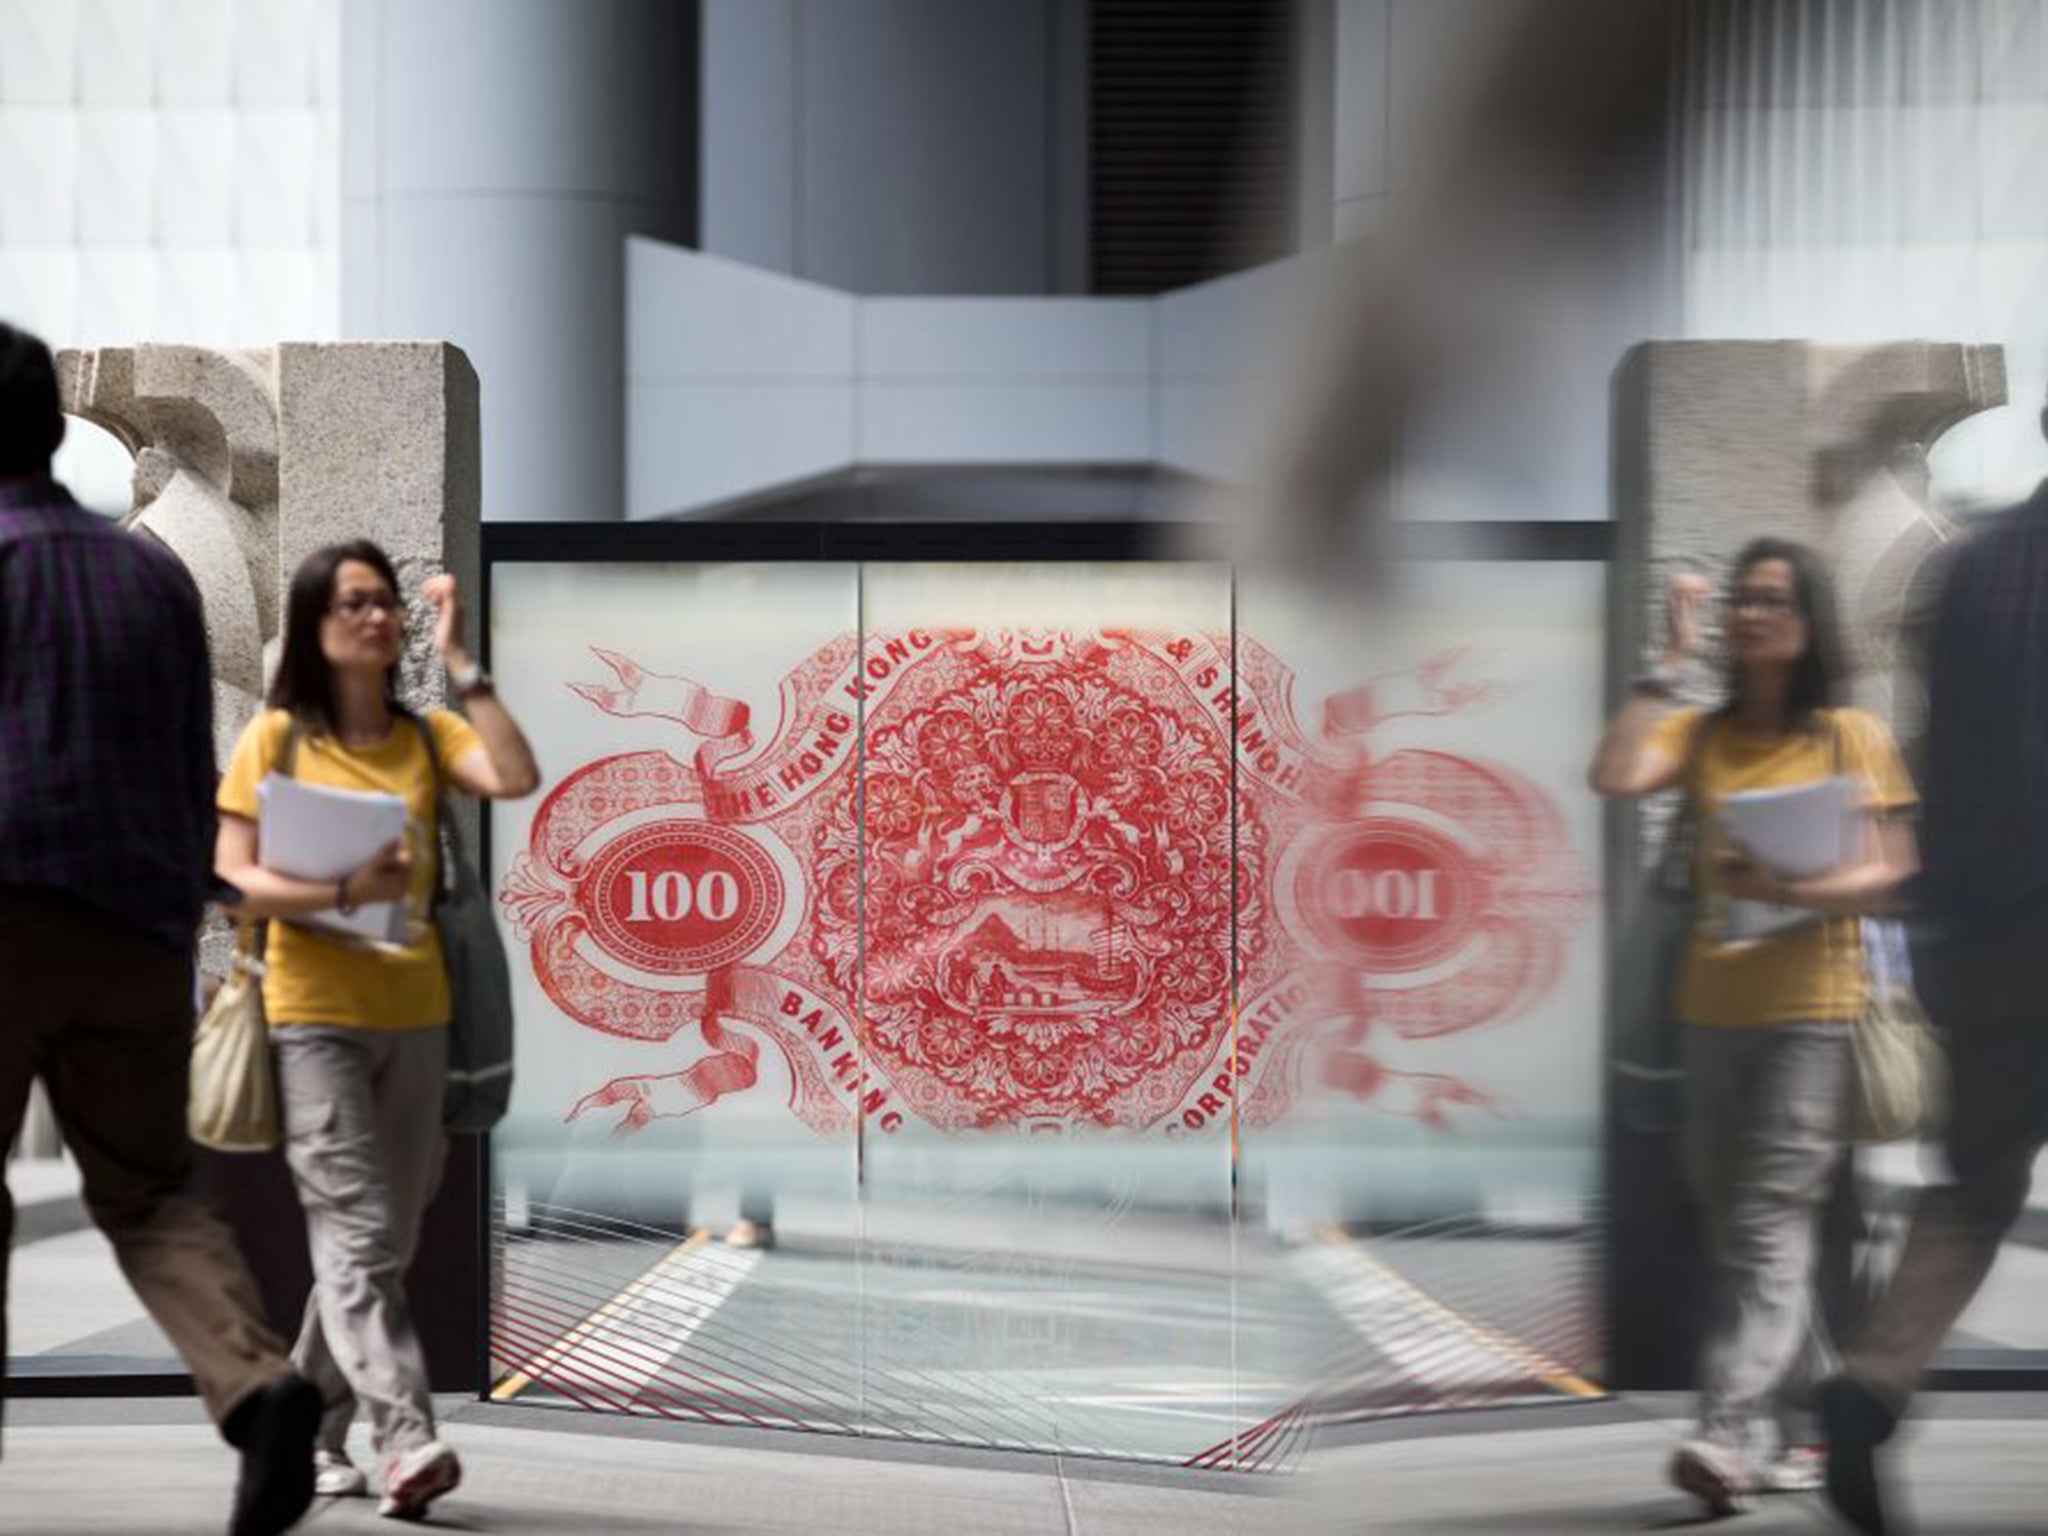 A giant Hong Kong $100 banknote stands in the window of HSBC’s Asia headquarters, but local citizens are worried about competition for jobs as links to the Pearl River delta region are strengthened